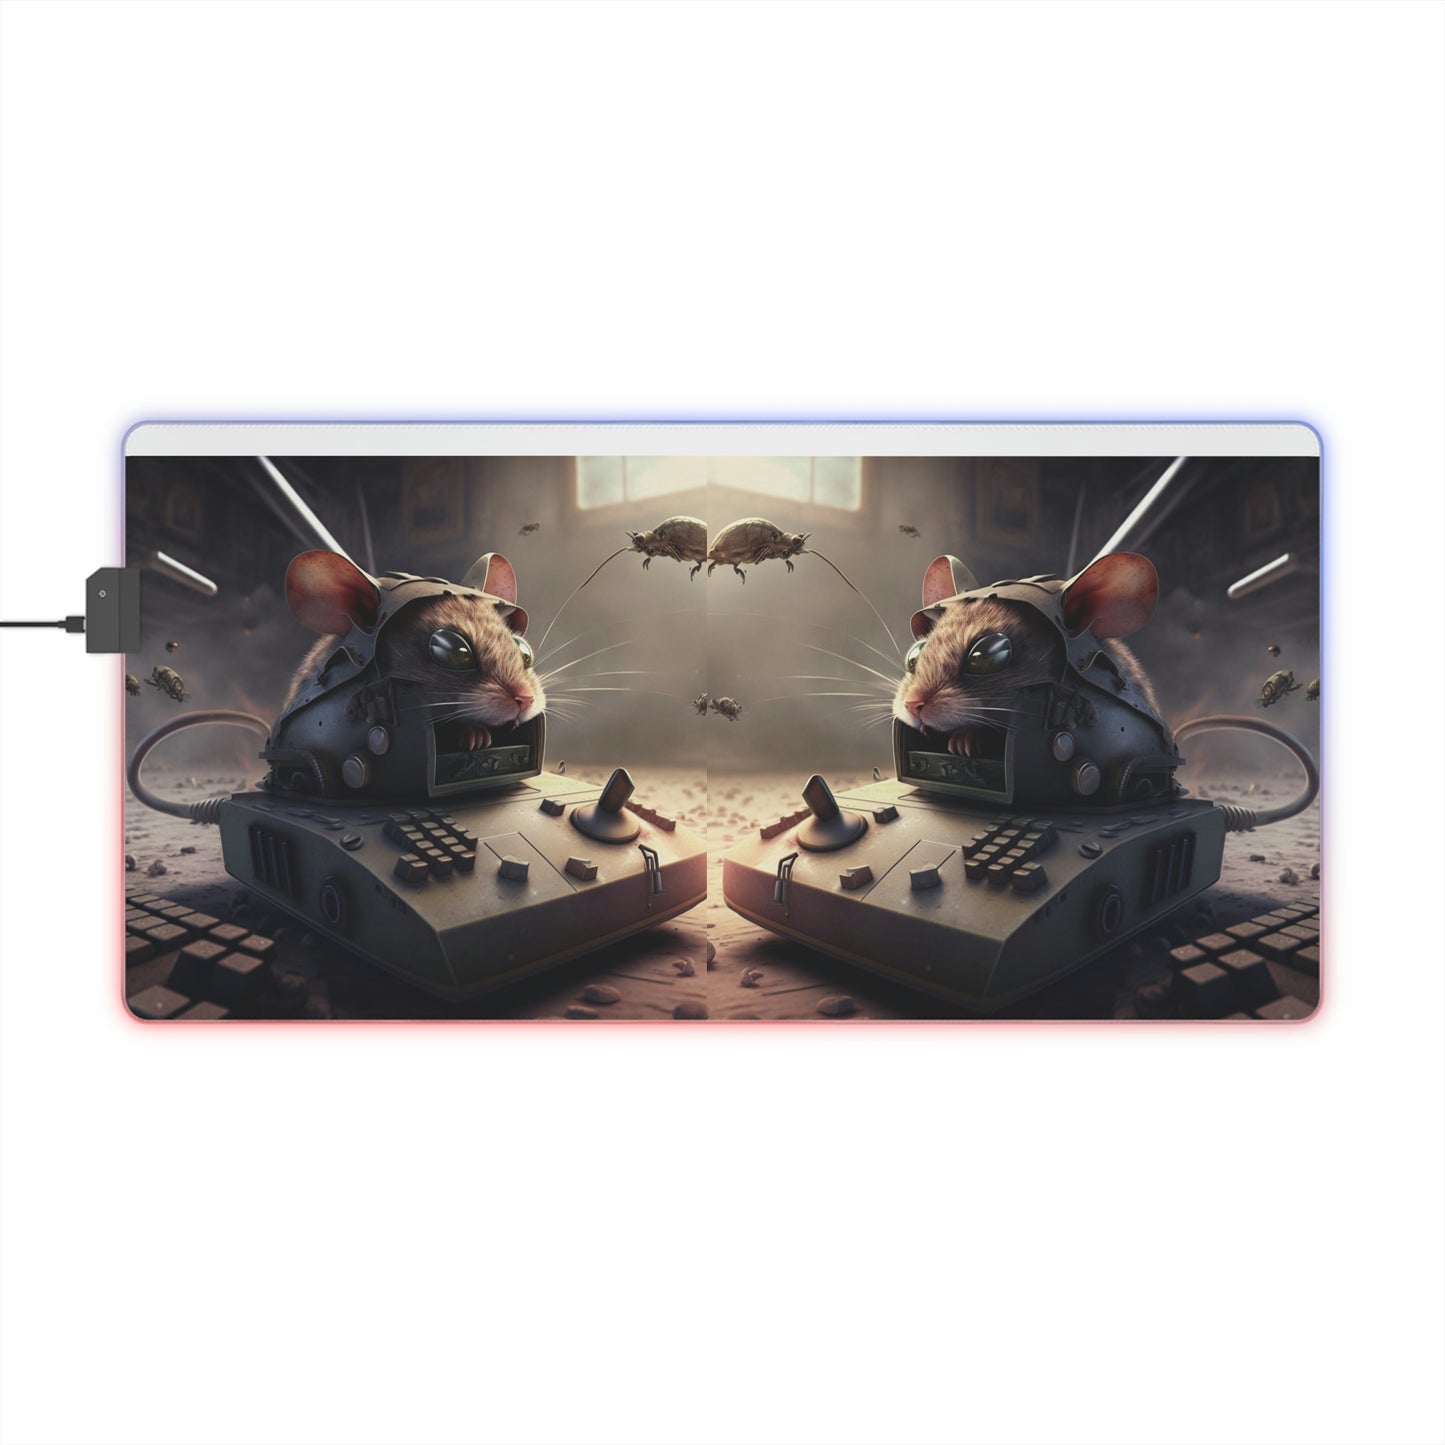 LED Gaming Mouse Pad Mouse Attack 4